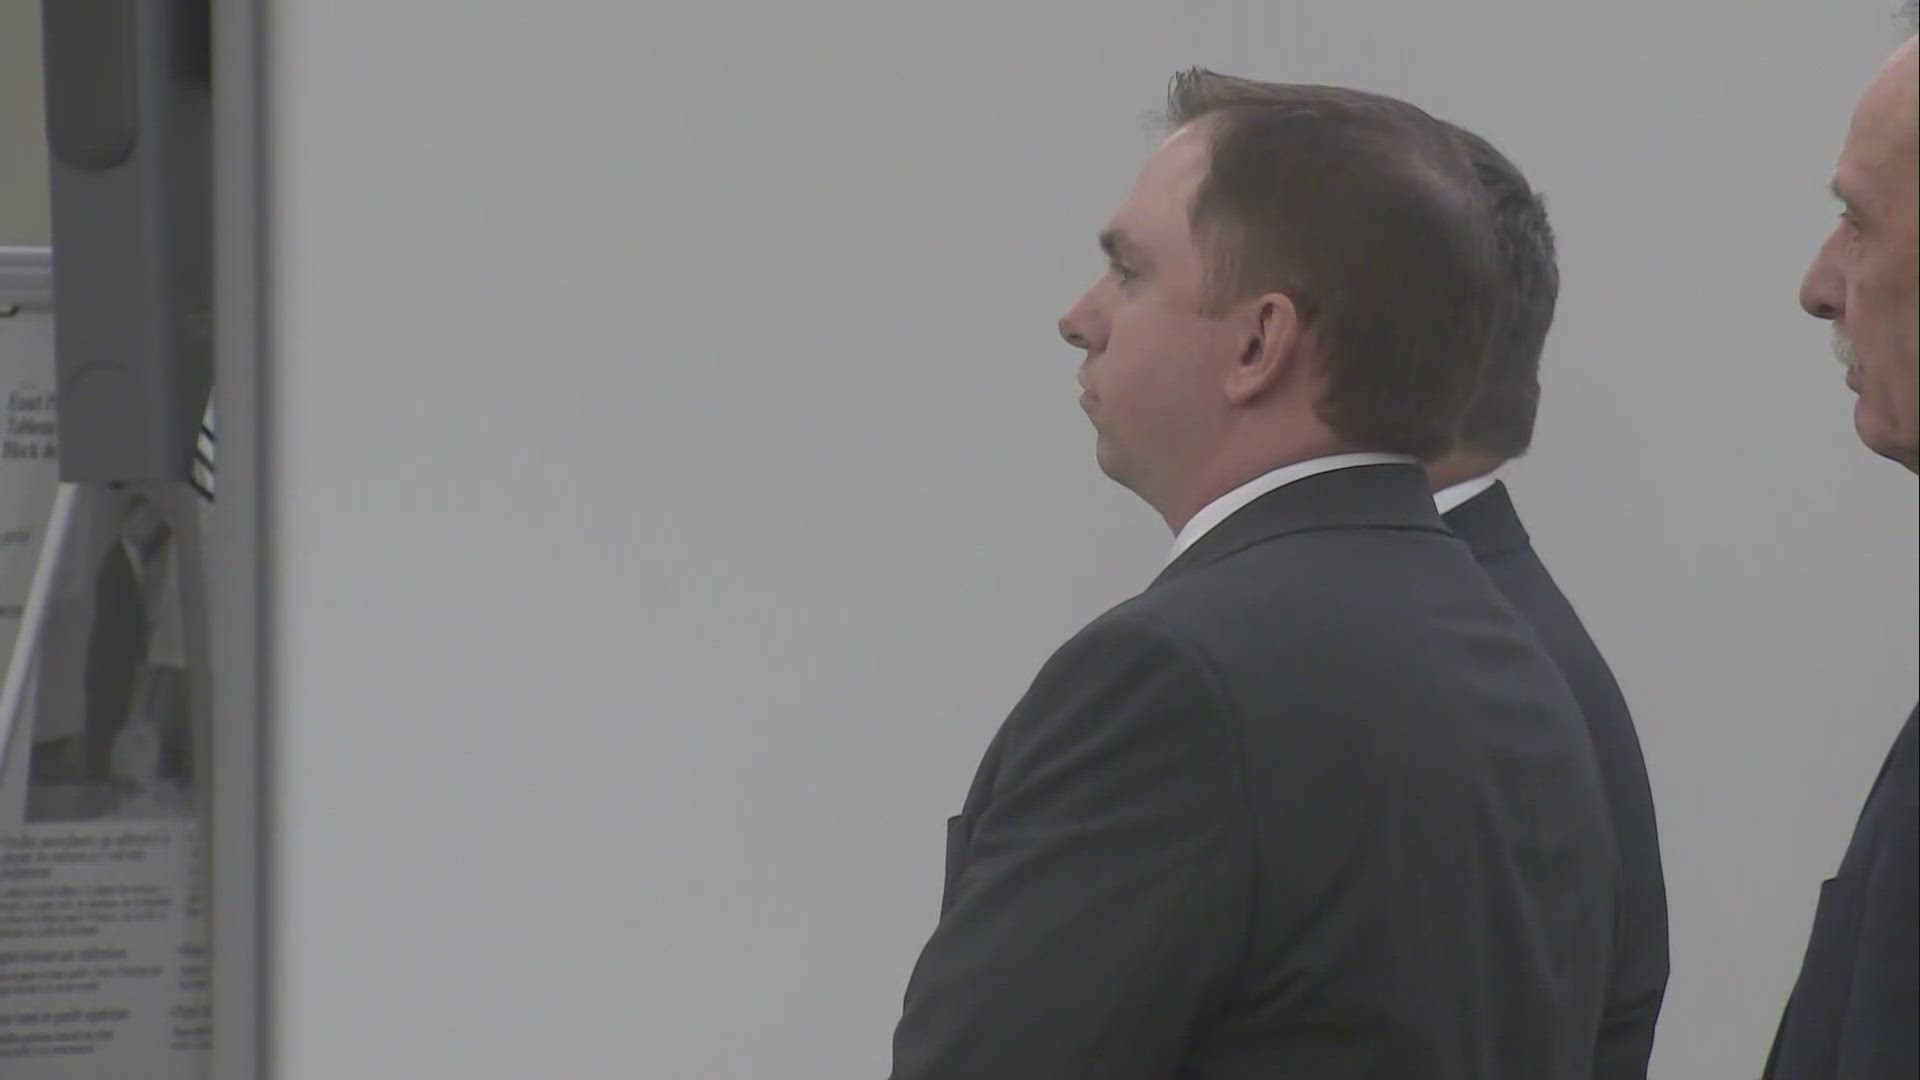 Former Fort Worth officer Aaron Dean was sentenced to 11 years, 10 months, 12 days on Dec. 15, 2022 for Jefferson's death in 2019.